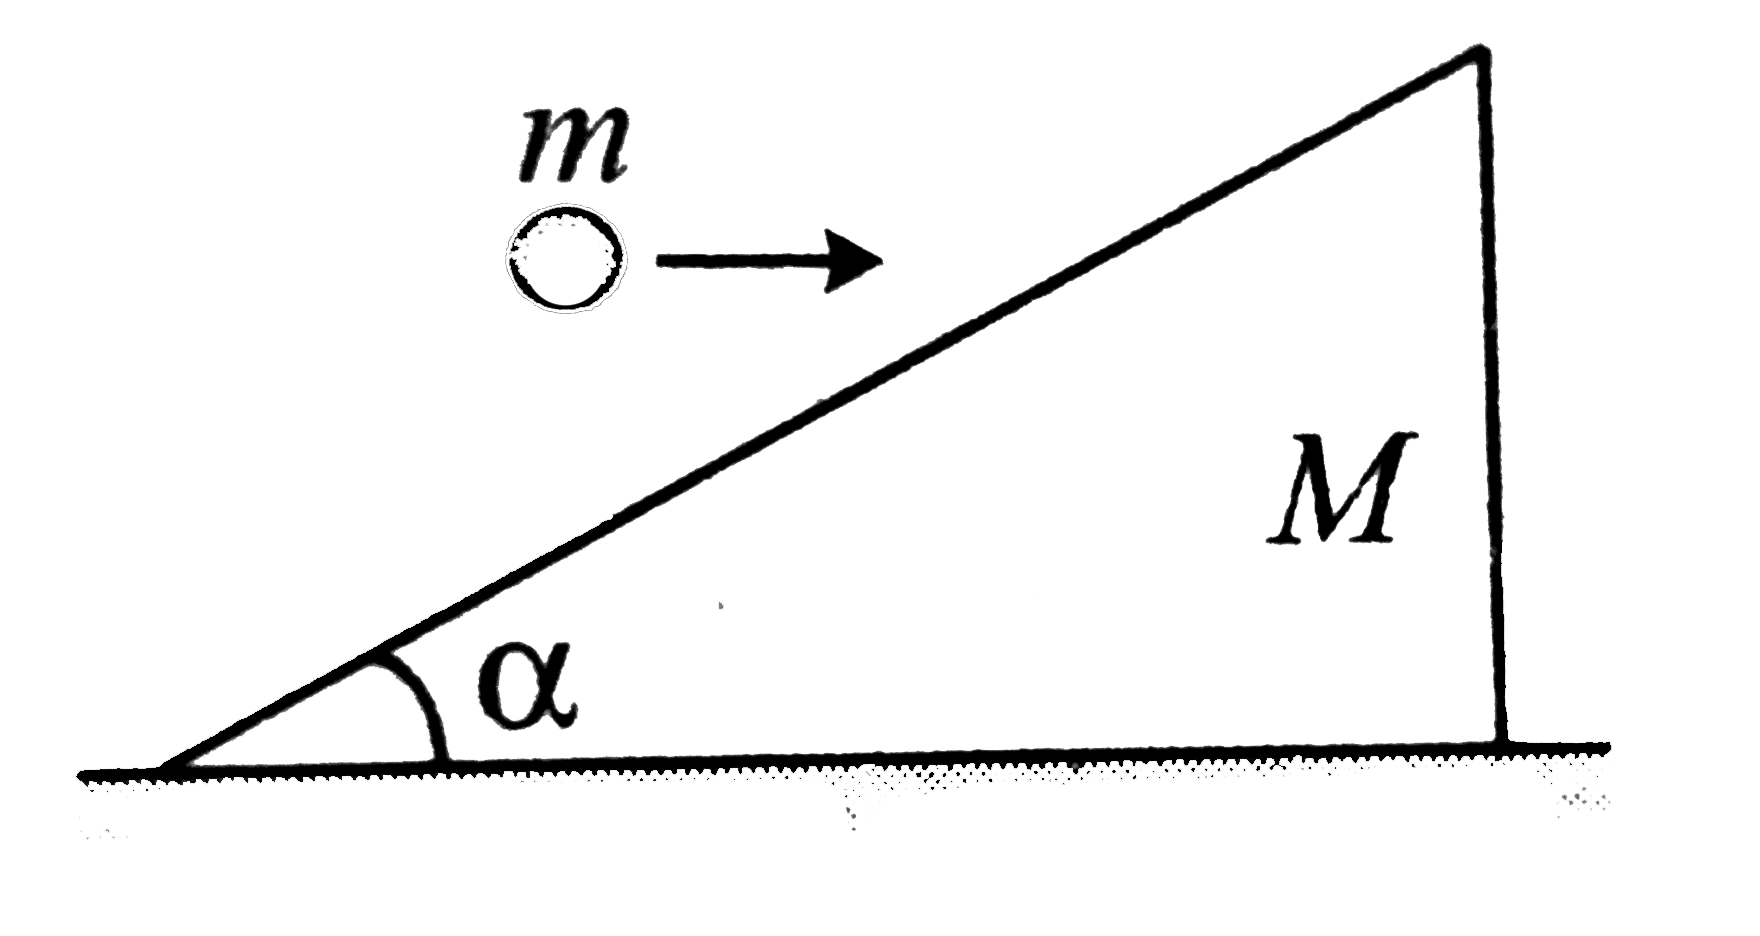 A ball of mass m moving with constant horizontal velocity u strikes a stationary wedge of mass M on its inclined surface as shown in the figure. After collision, the ball starts moving up the inclined plane. The wedge is placed on frictionless horizontal surface.  a. Calculate the velocity of wedge immediately after collision.  b. Calculate the maximum height the ball can ascend on the wedge.